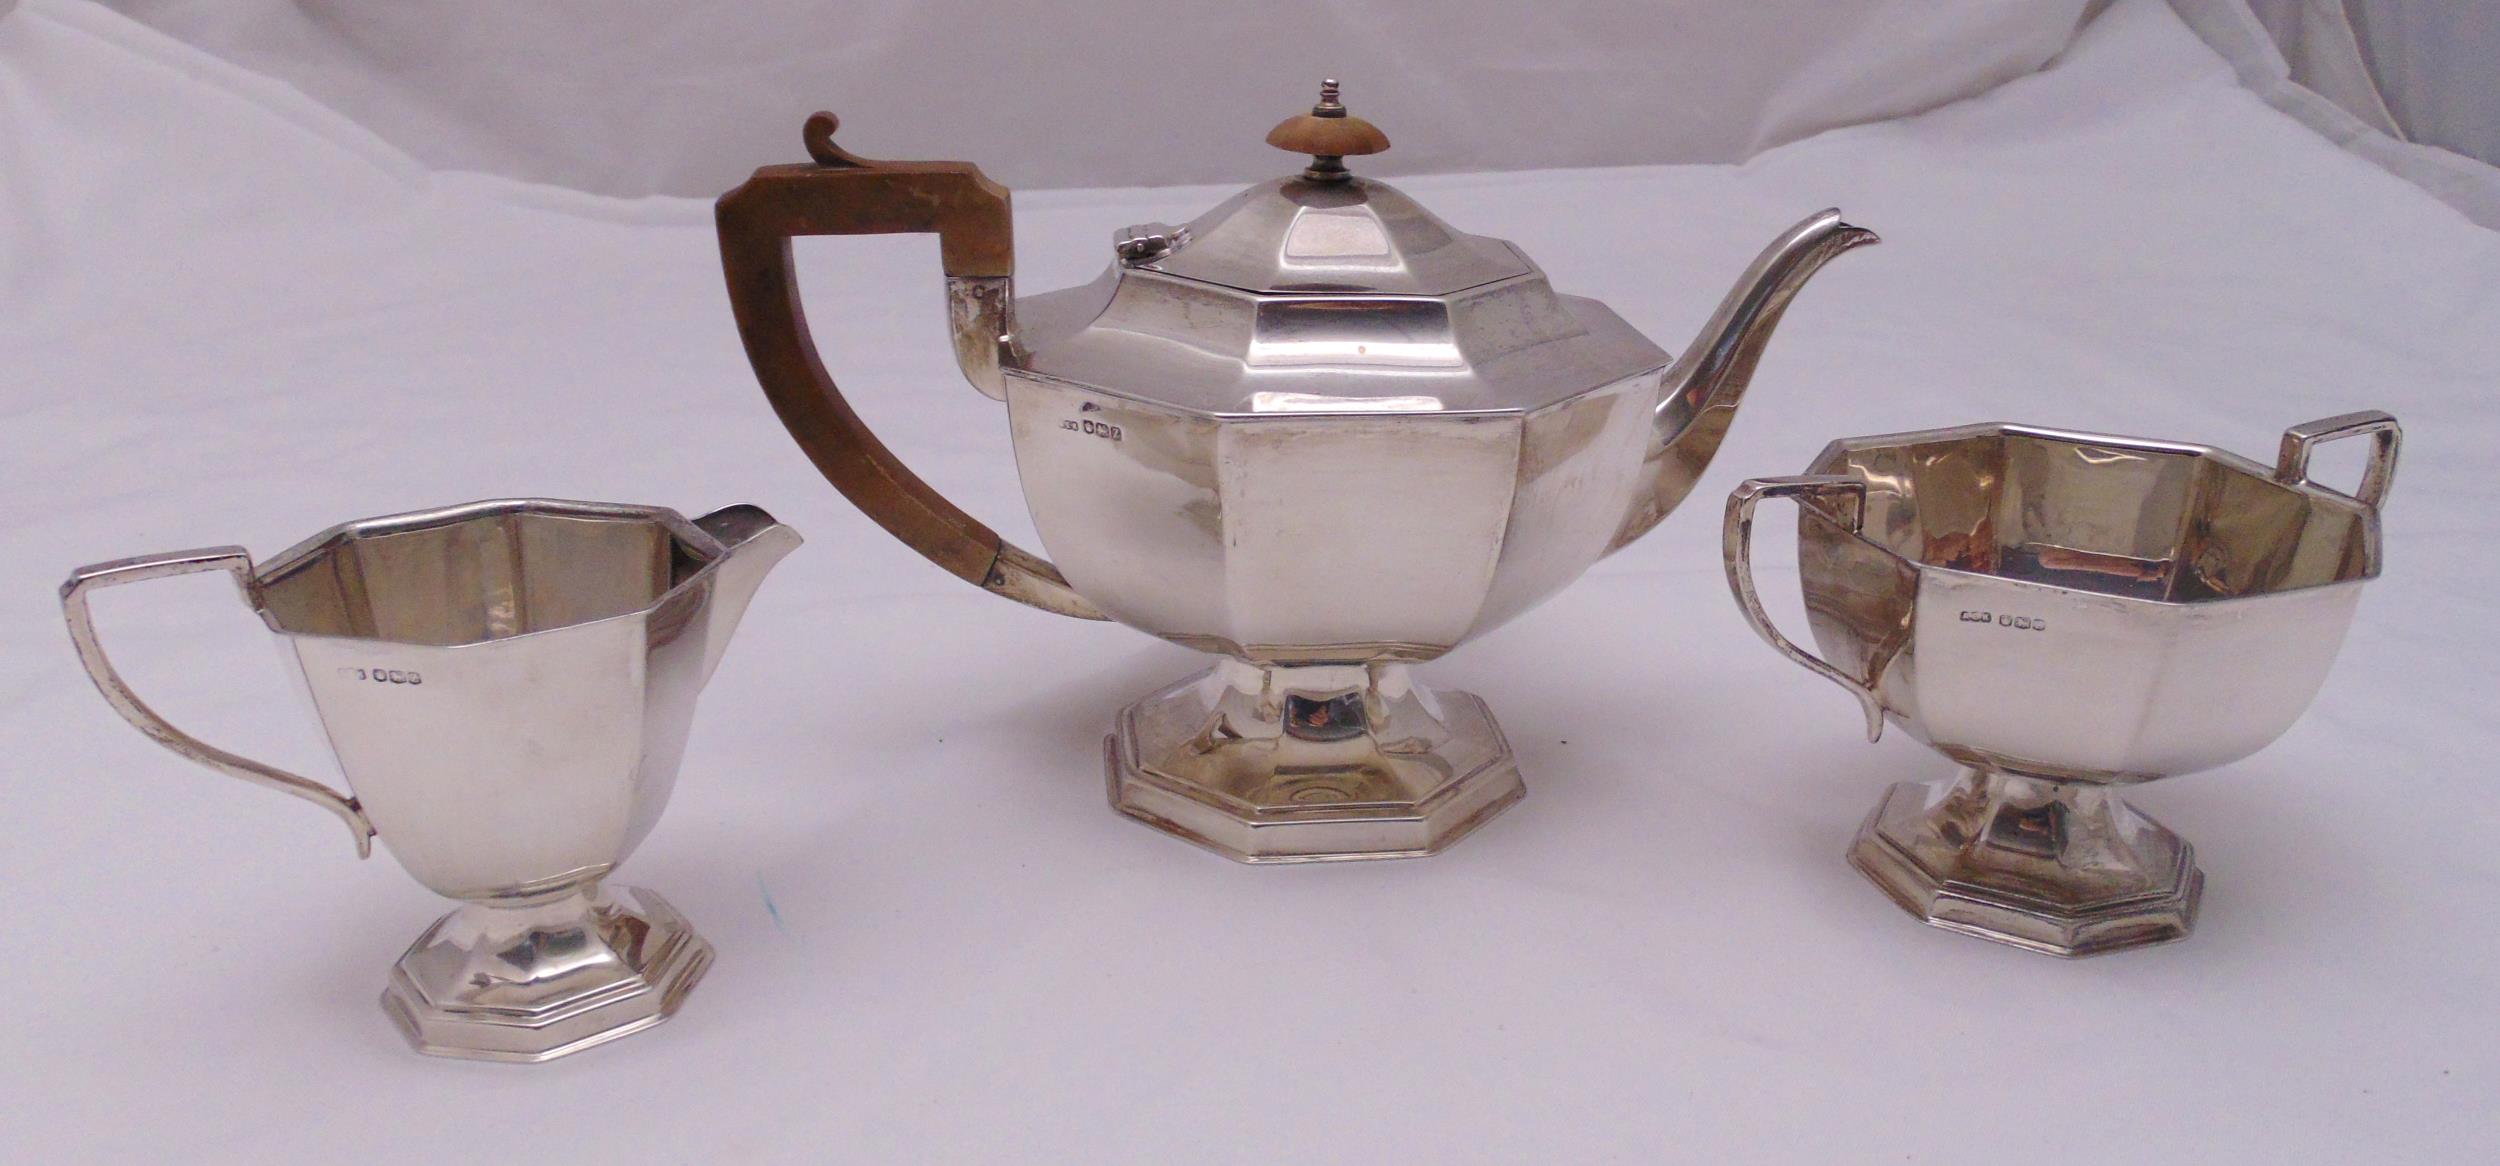 A hallmarked silver three piece teaset of panelled octagonal form to include a teapot, milk jug